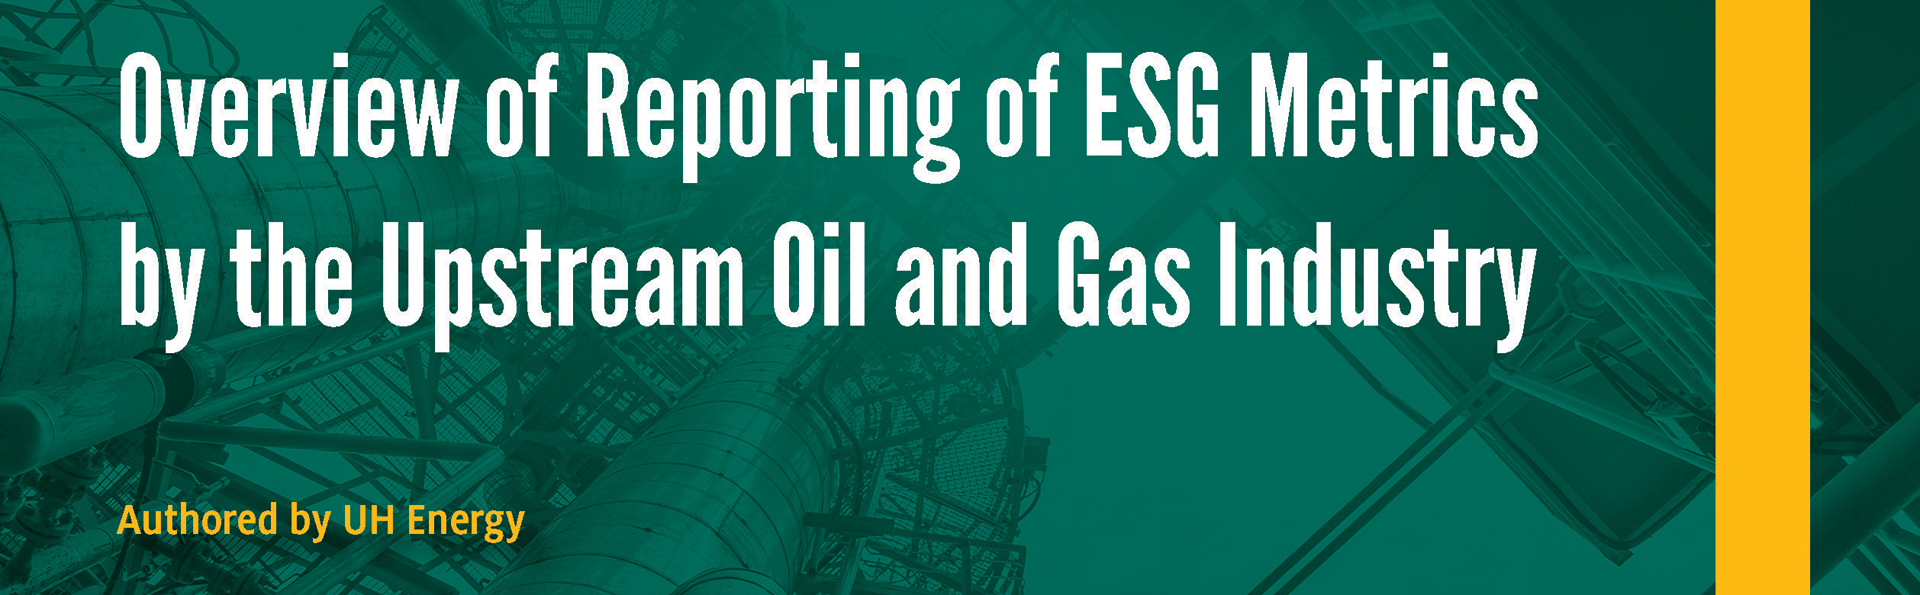 Overview of Reporting of ESG Metrics by the Upstream Oil and Gas Industry - Click here to read this White Paper